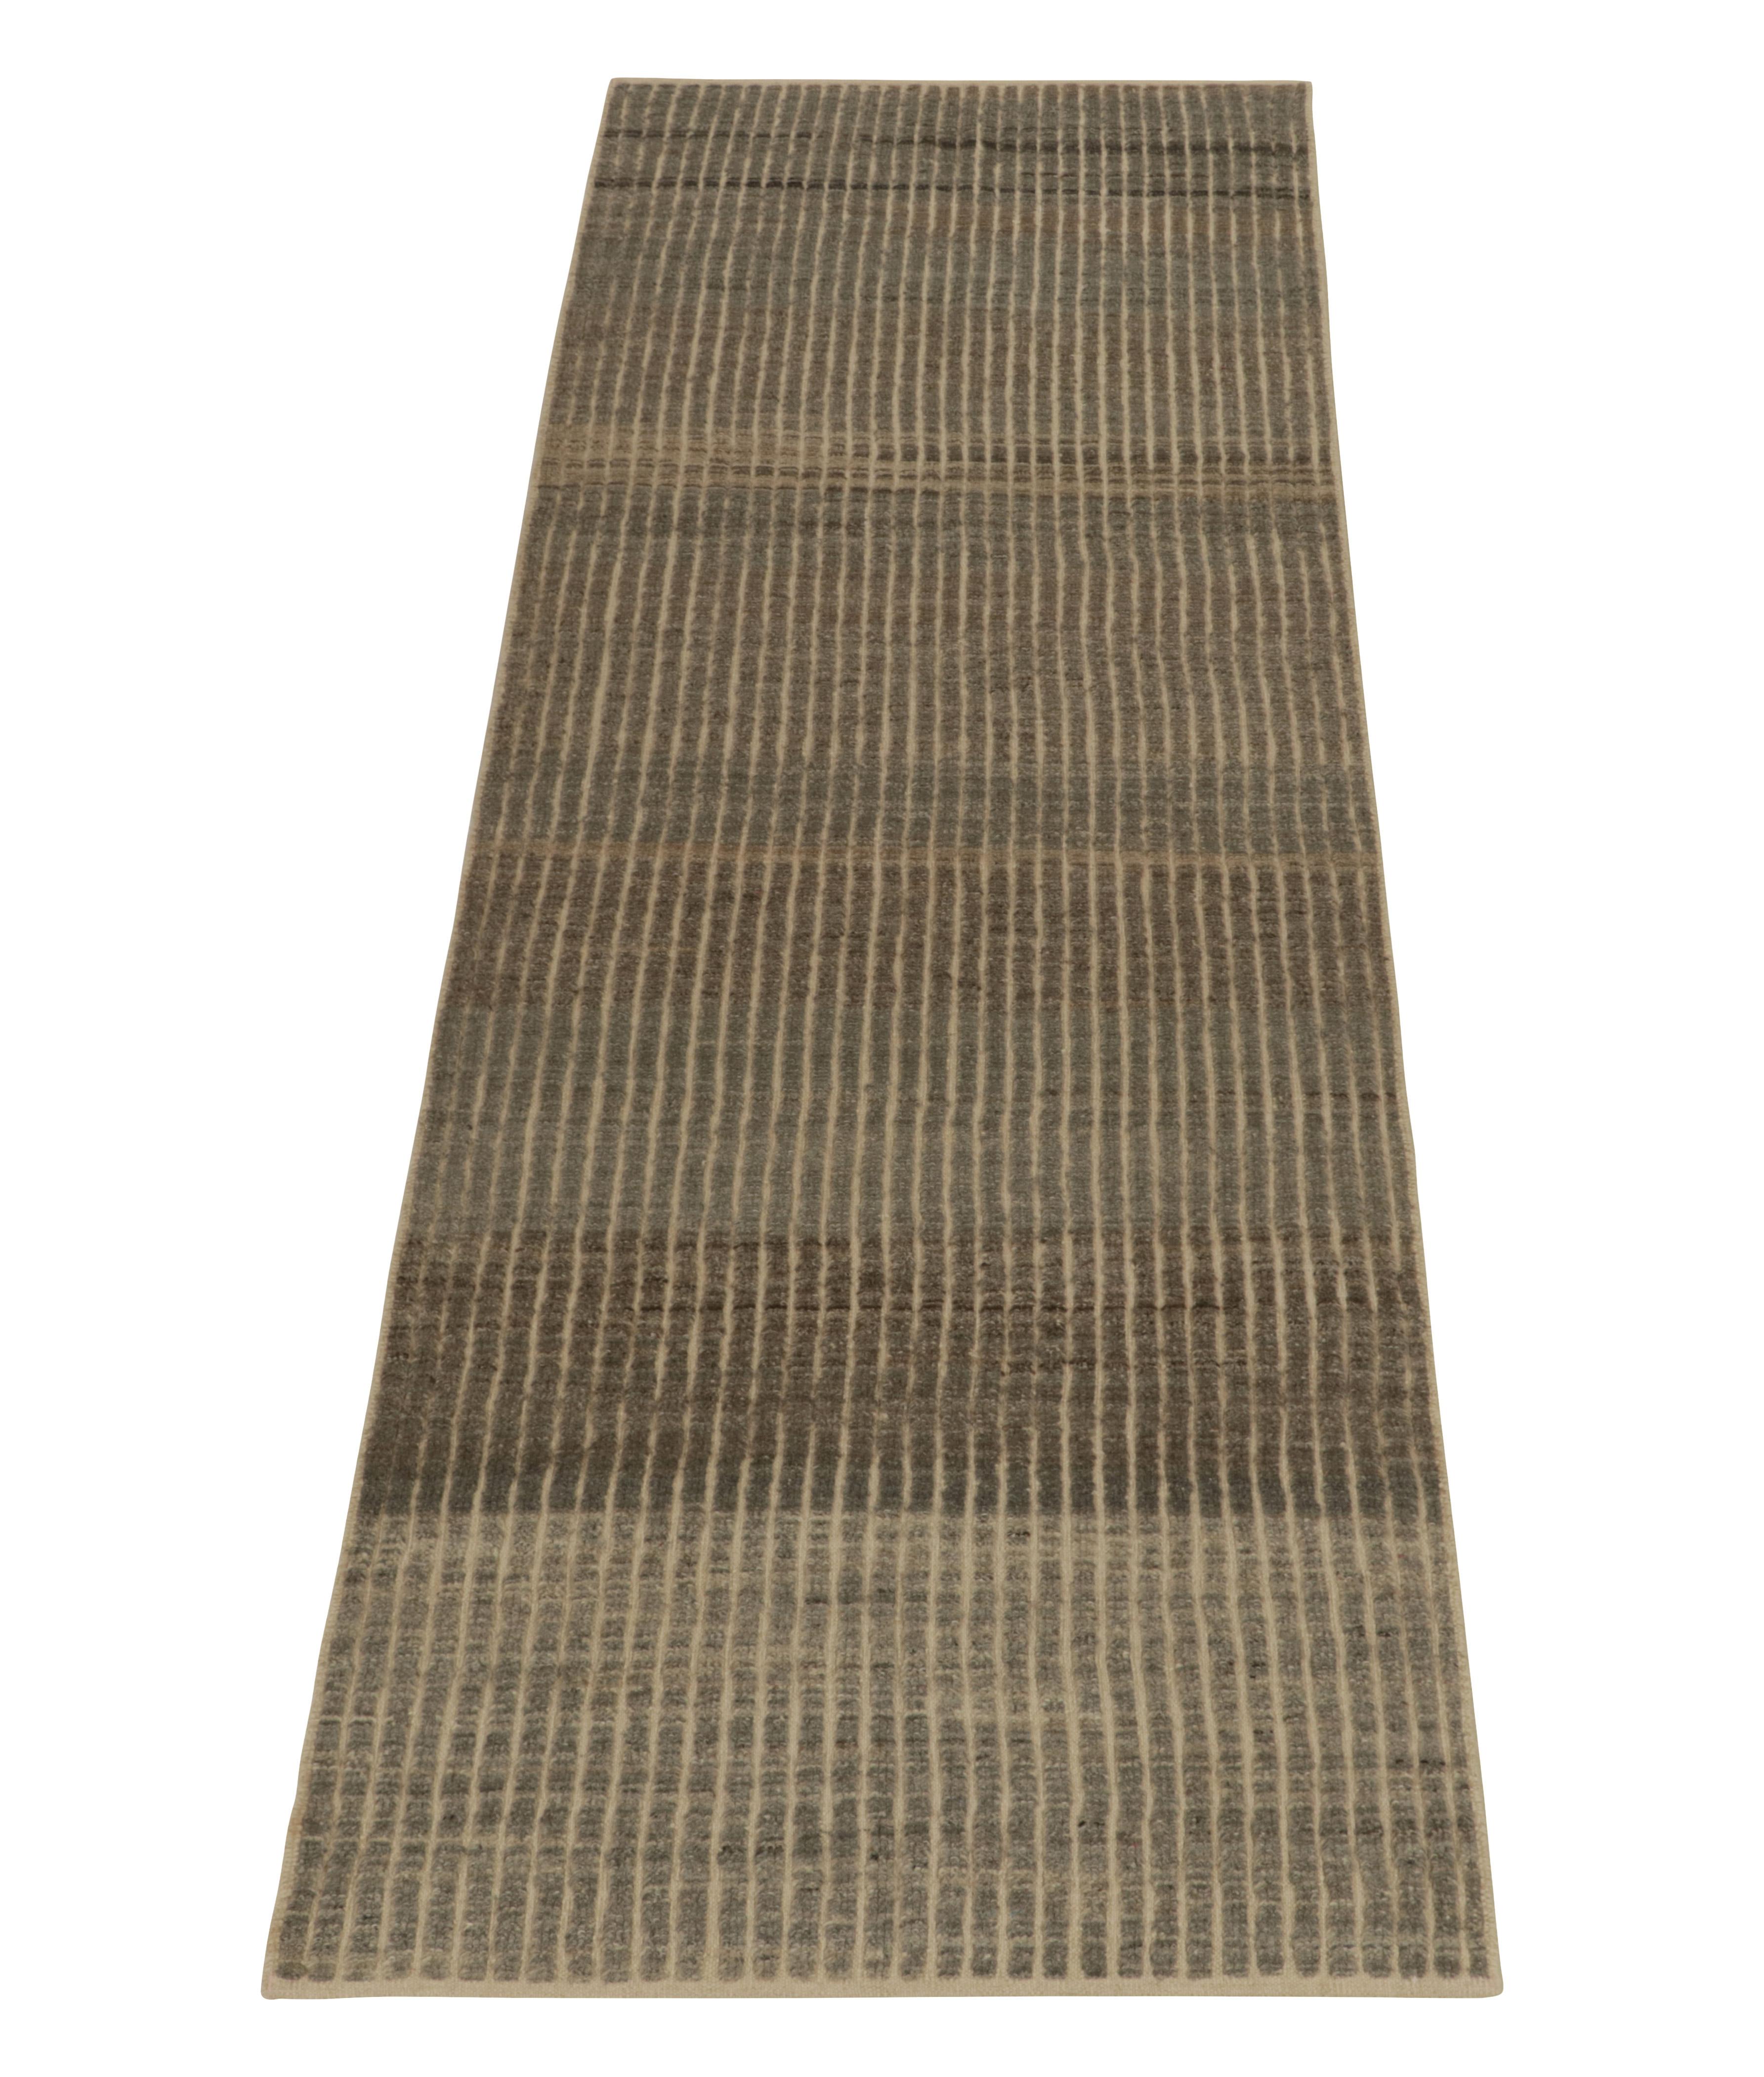 From Rug & Kilim’s modern classic selections, a 3x10 hand-knotted runner relishing Moroccan aesthetics. The vision witnesses a marriage of rich brown, beige, black & gray tones sitting beautifully in a striated pattern for exceptional pagination on